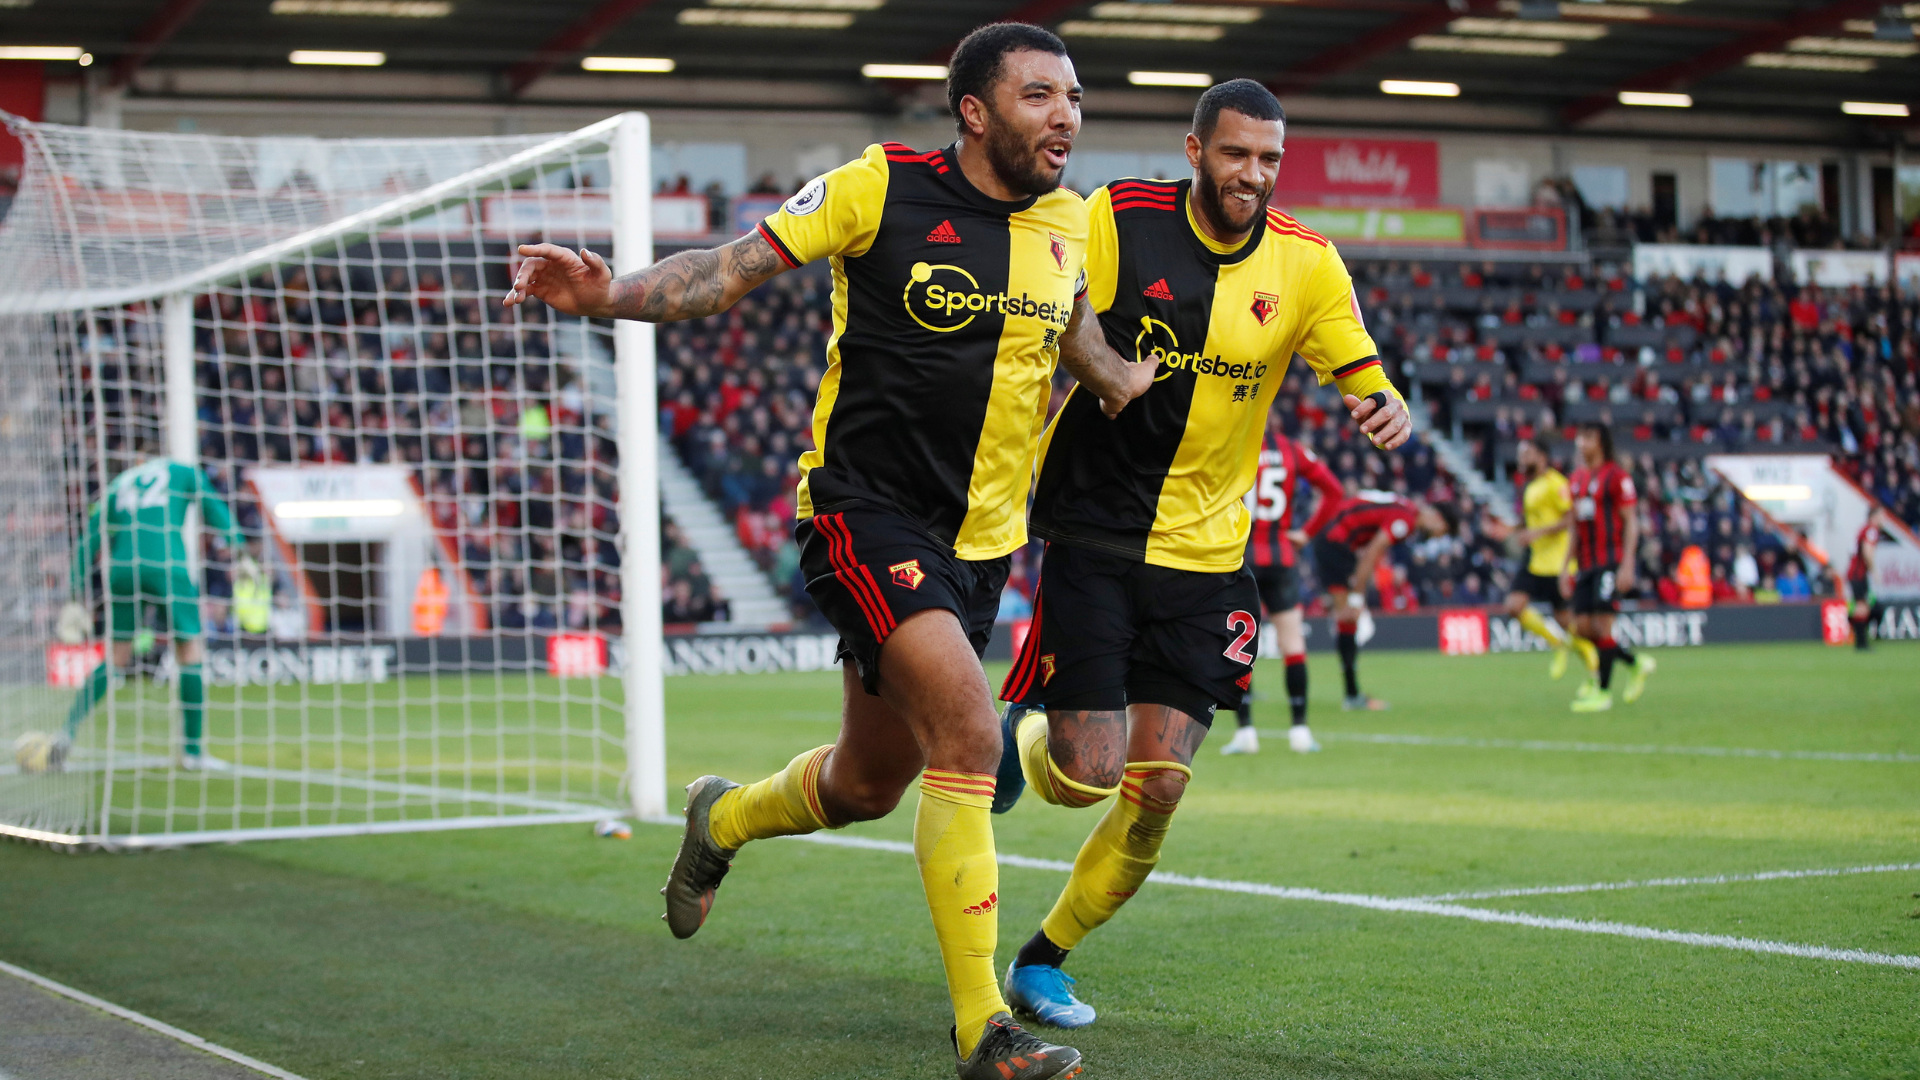 Troy Deeney and Etienne Capoue